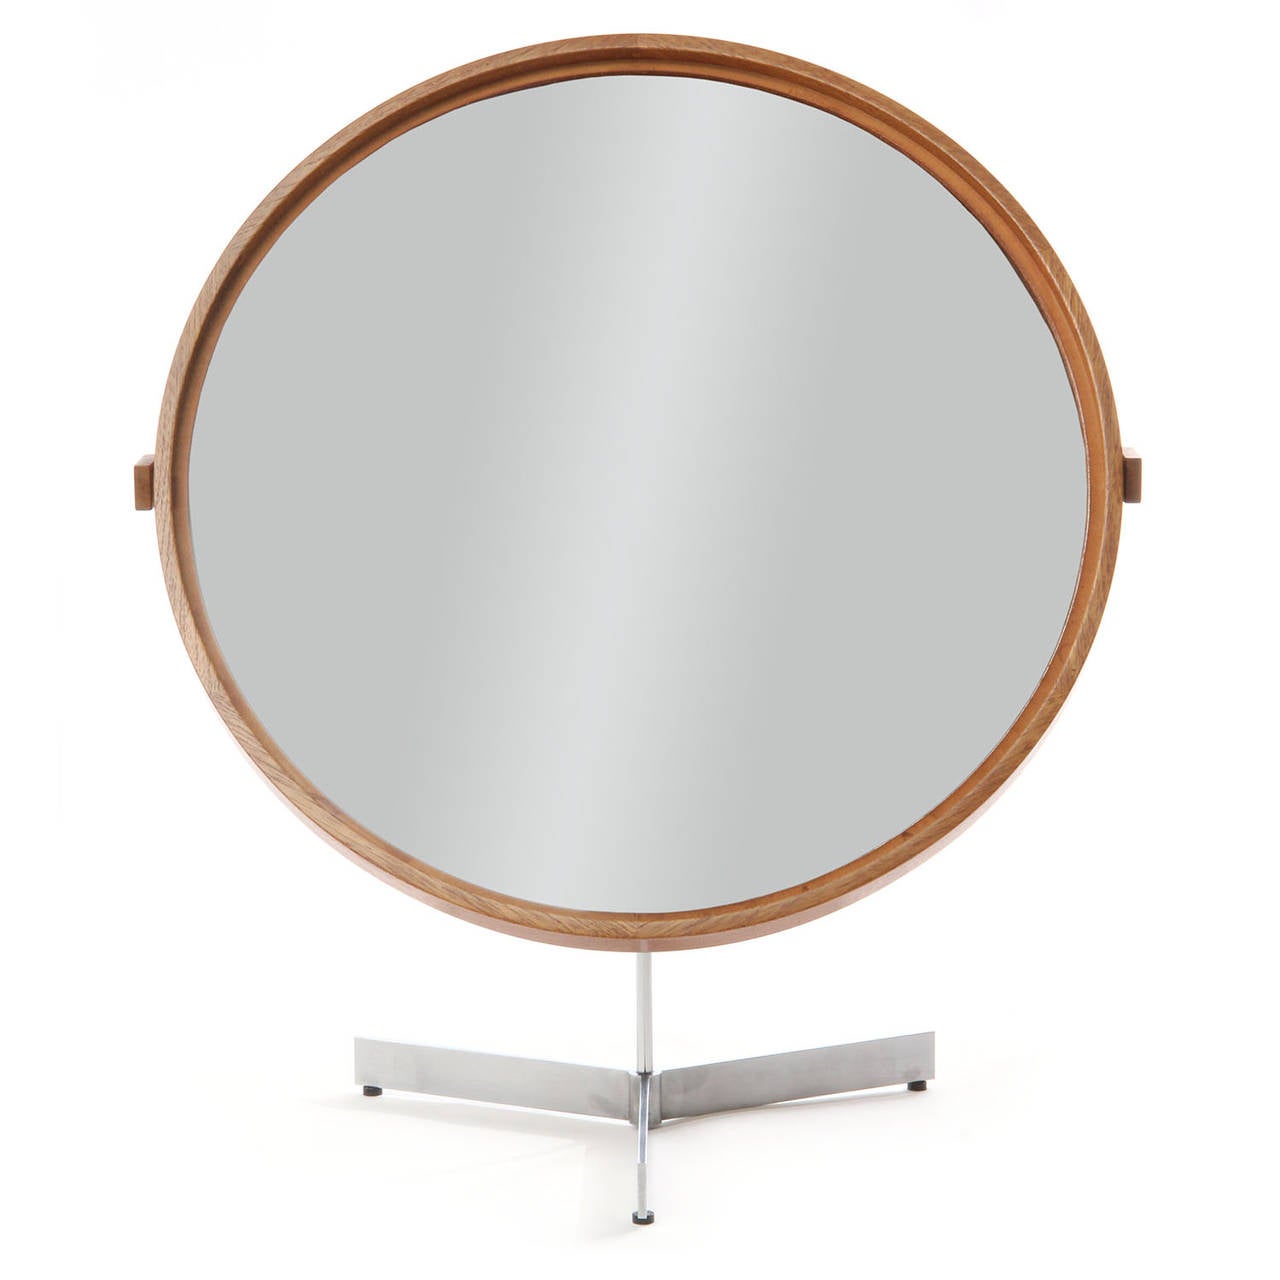 A sculptural and elegant tilting and swiveling oak framed vanity mirror that floats on a spare architectural brushed steel tripod base.